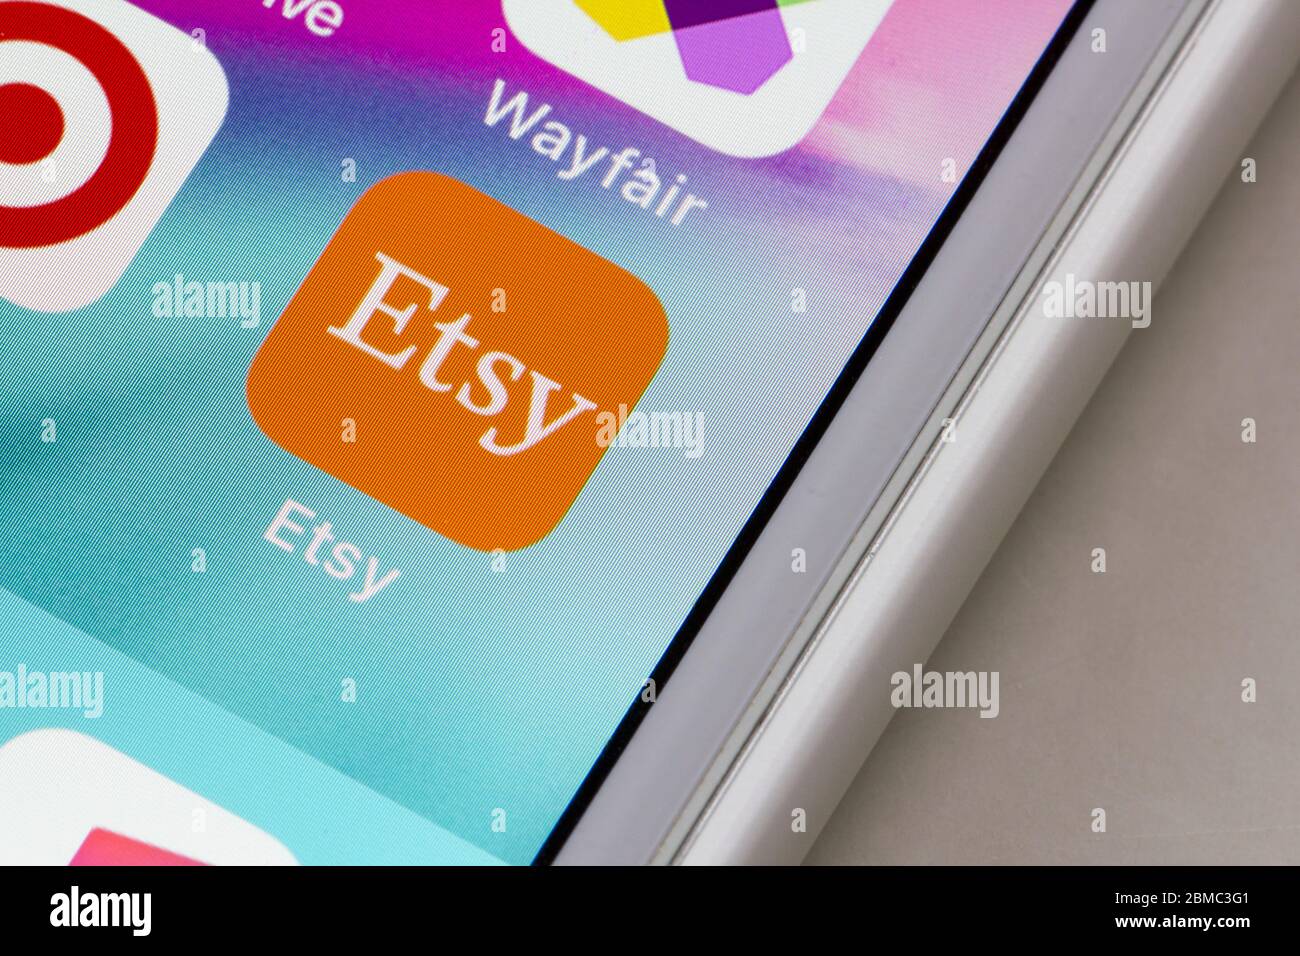 Etsy mobile app icon is seen on an iPhone. Etsy is an American e-commerce website focused on handmade or vintage items and craft supplies. Stock Photo